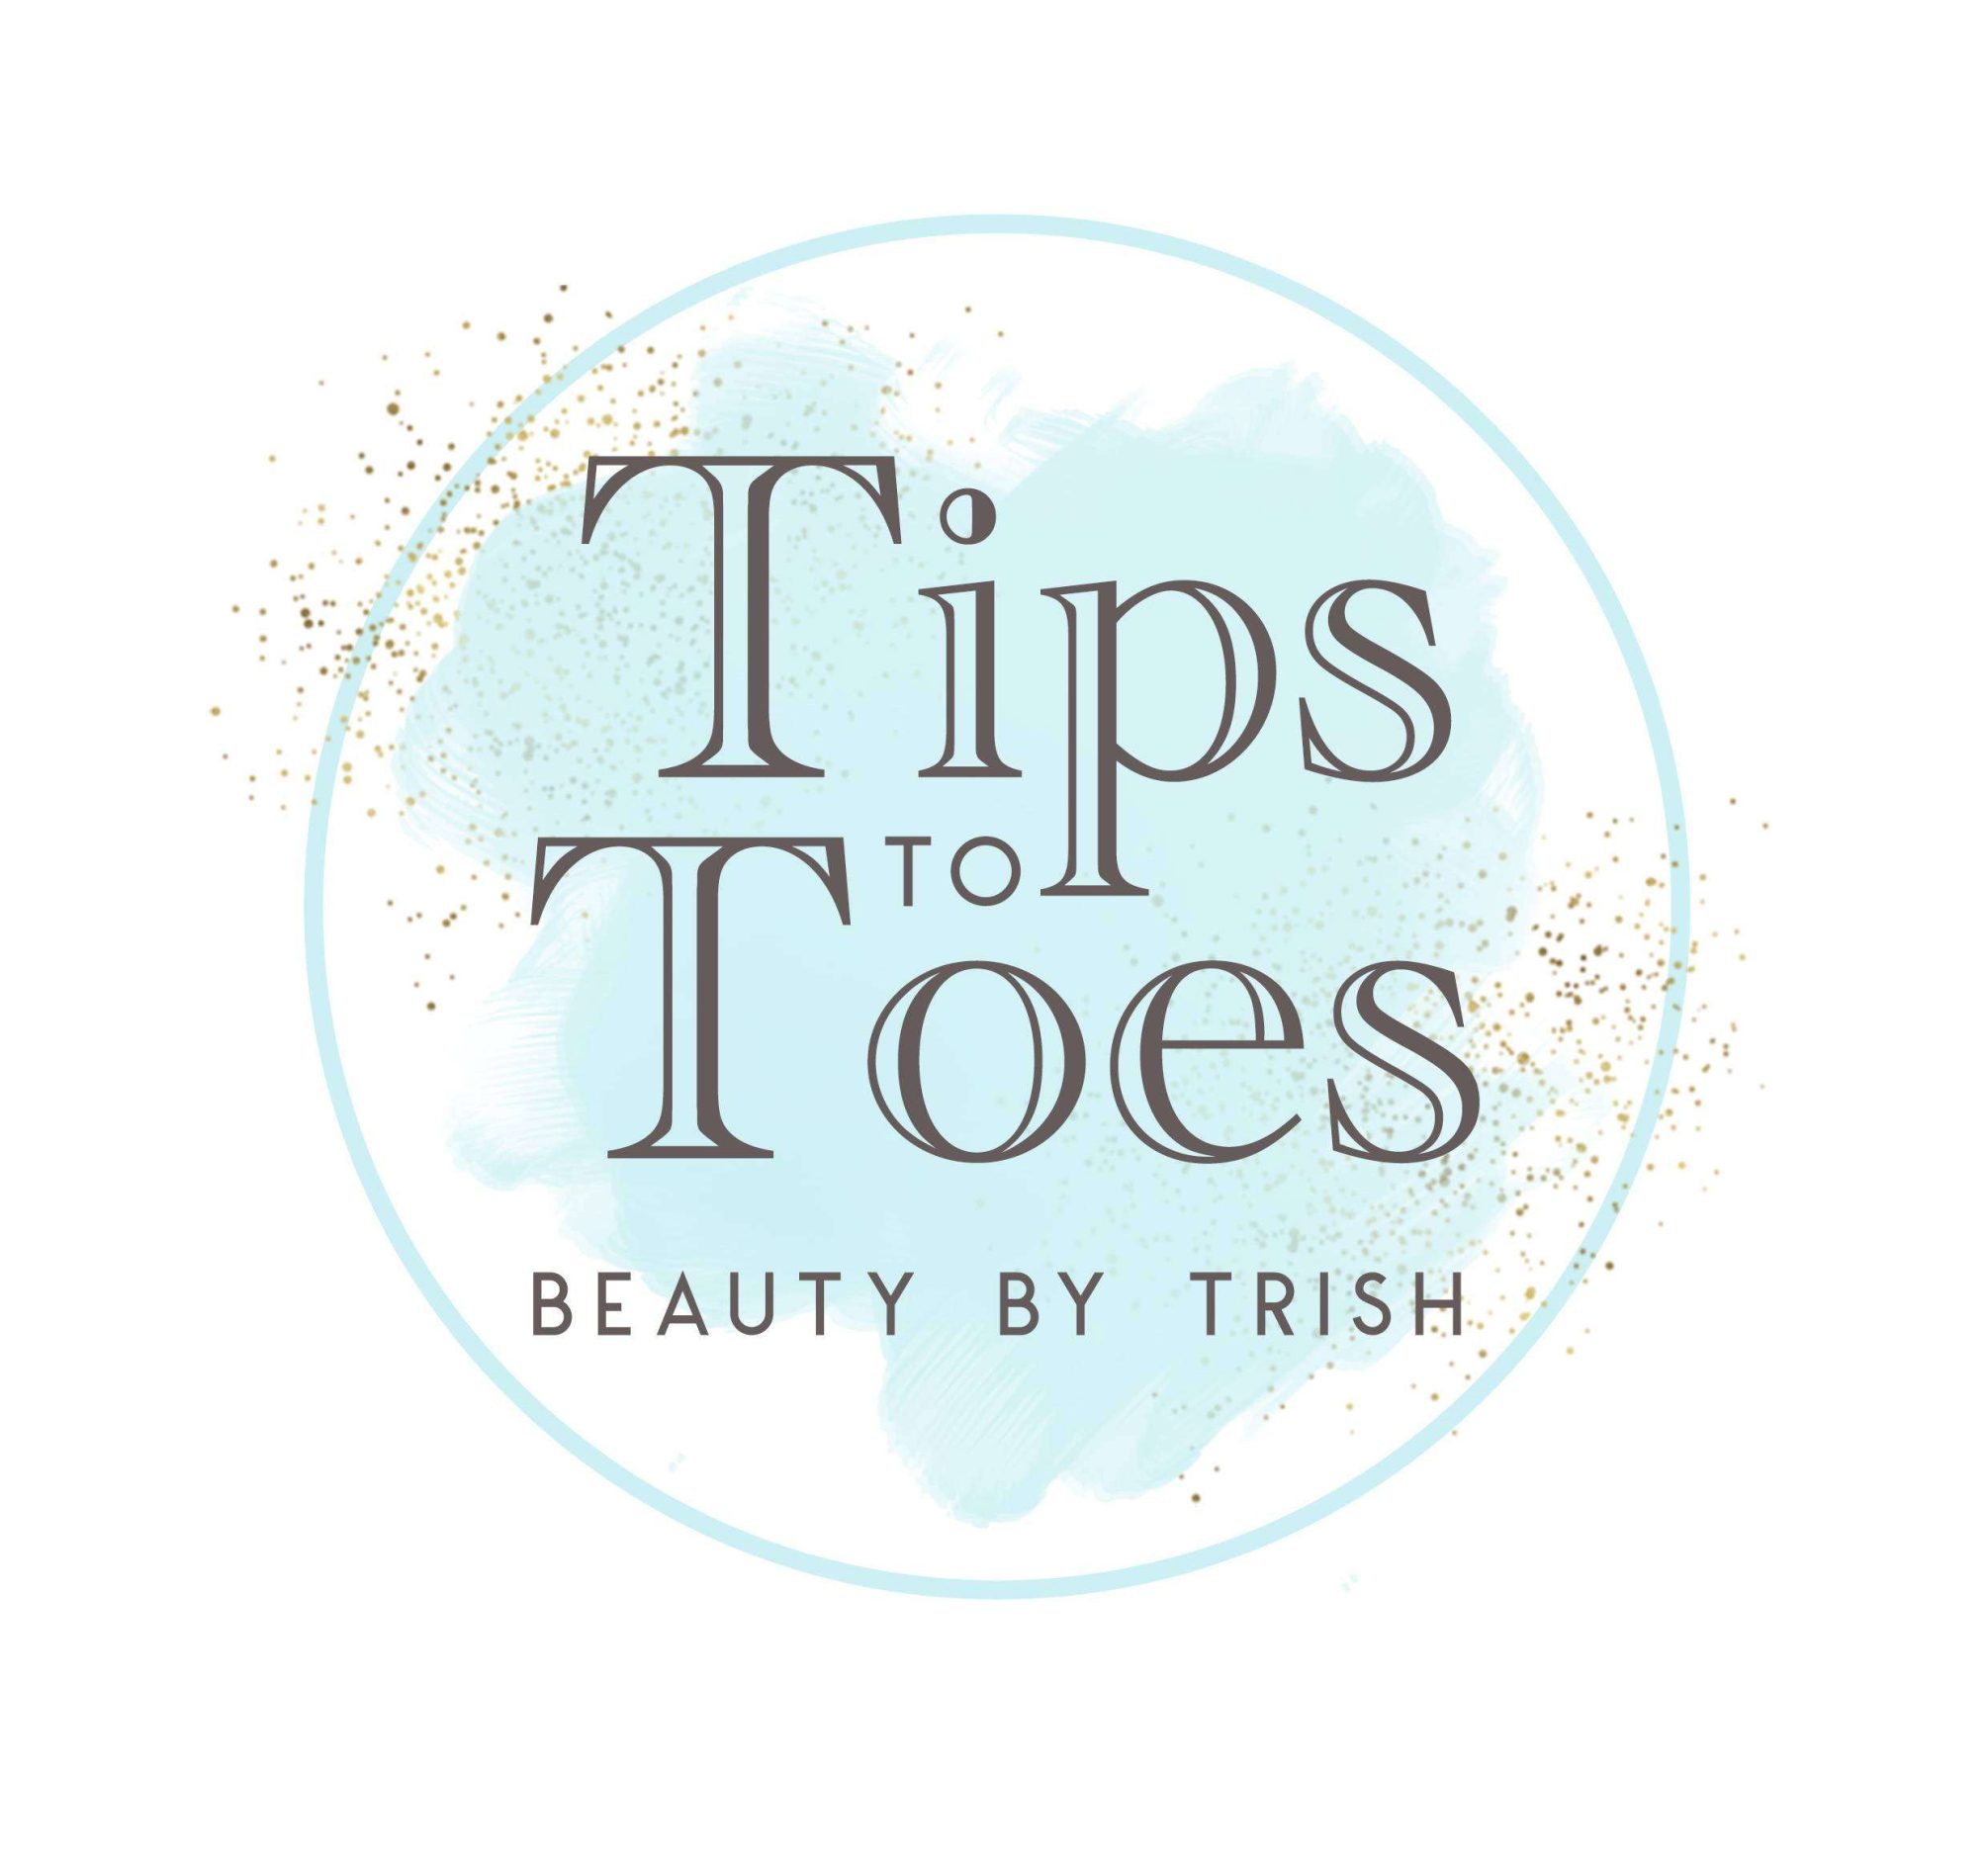 Tips To Toes Aberdare